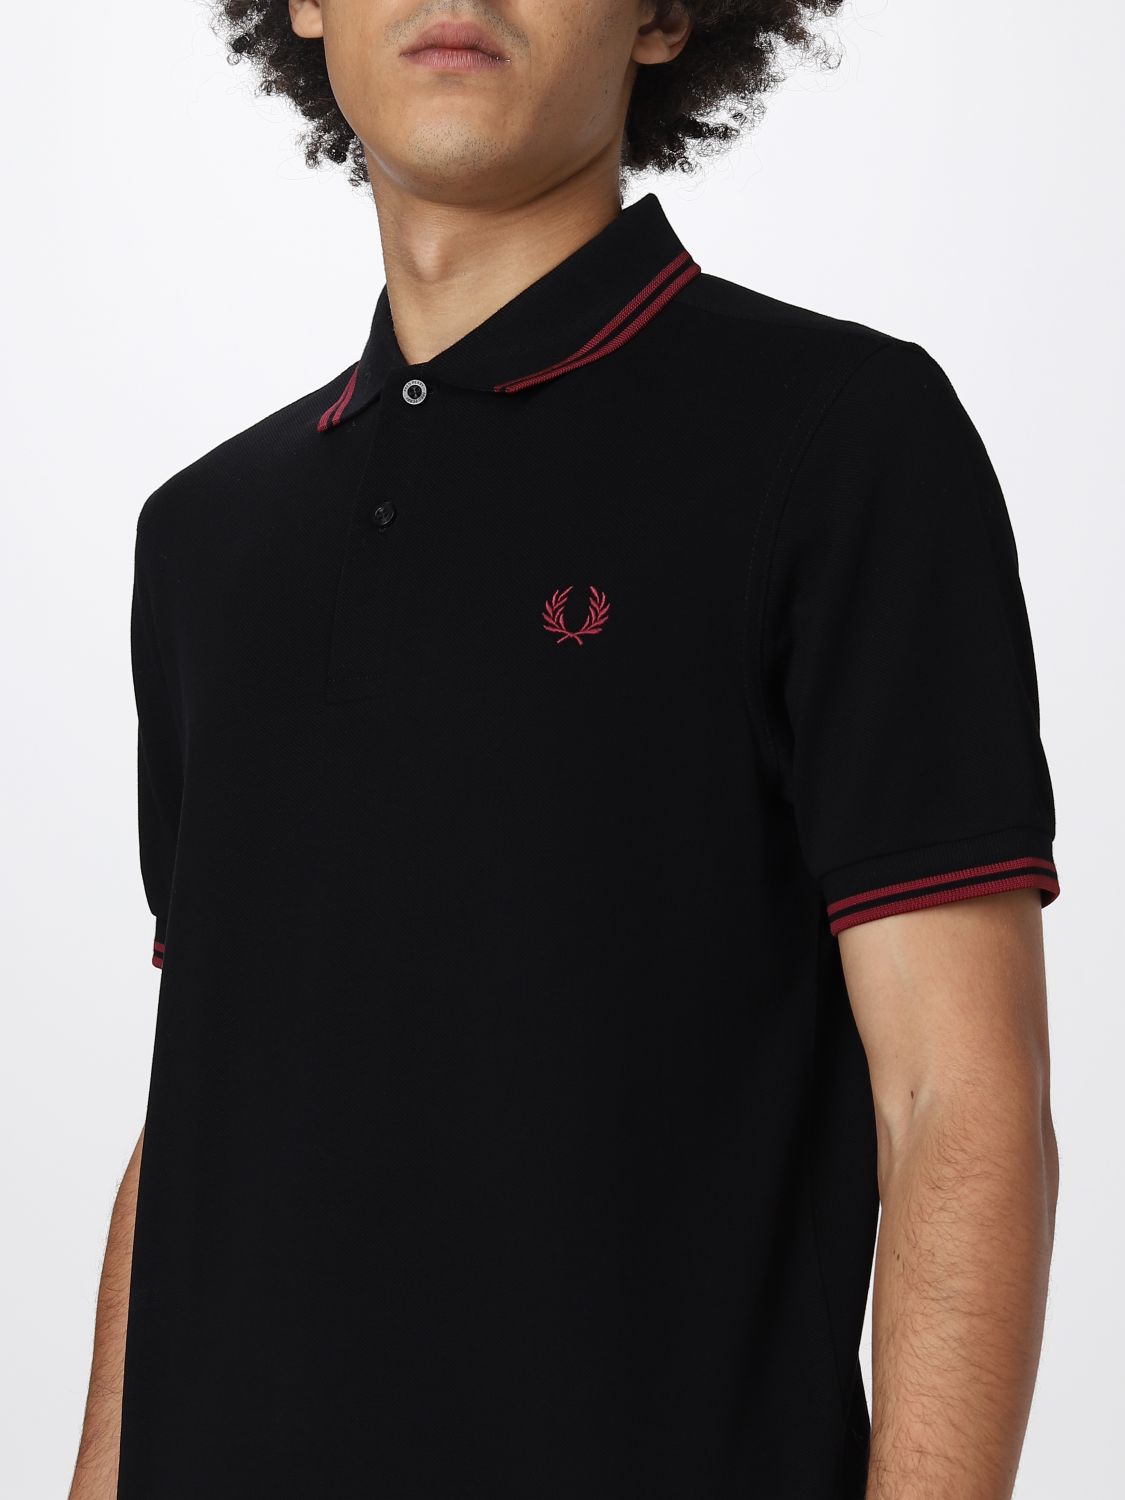 FRED PERRY: polo shirt for man - Black | Fred Perry polo shirt ...